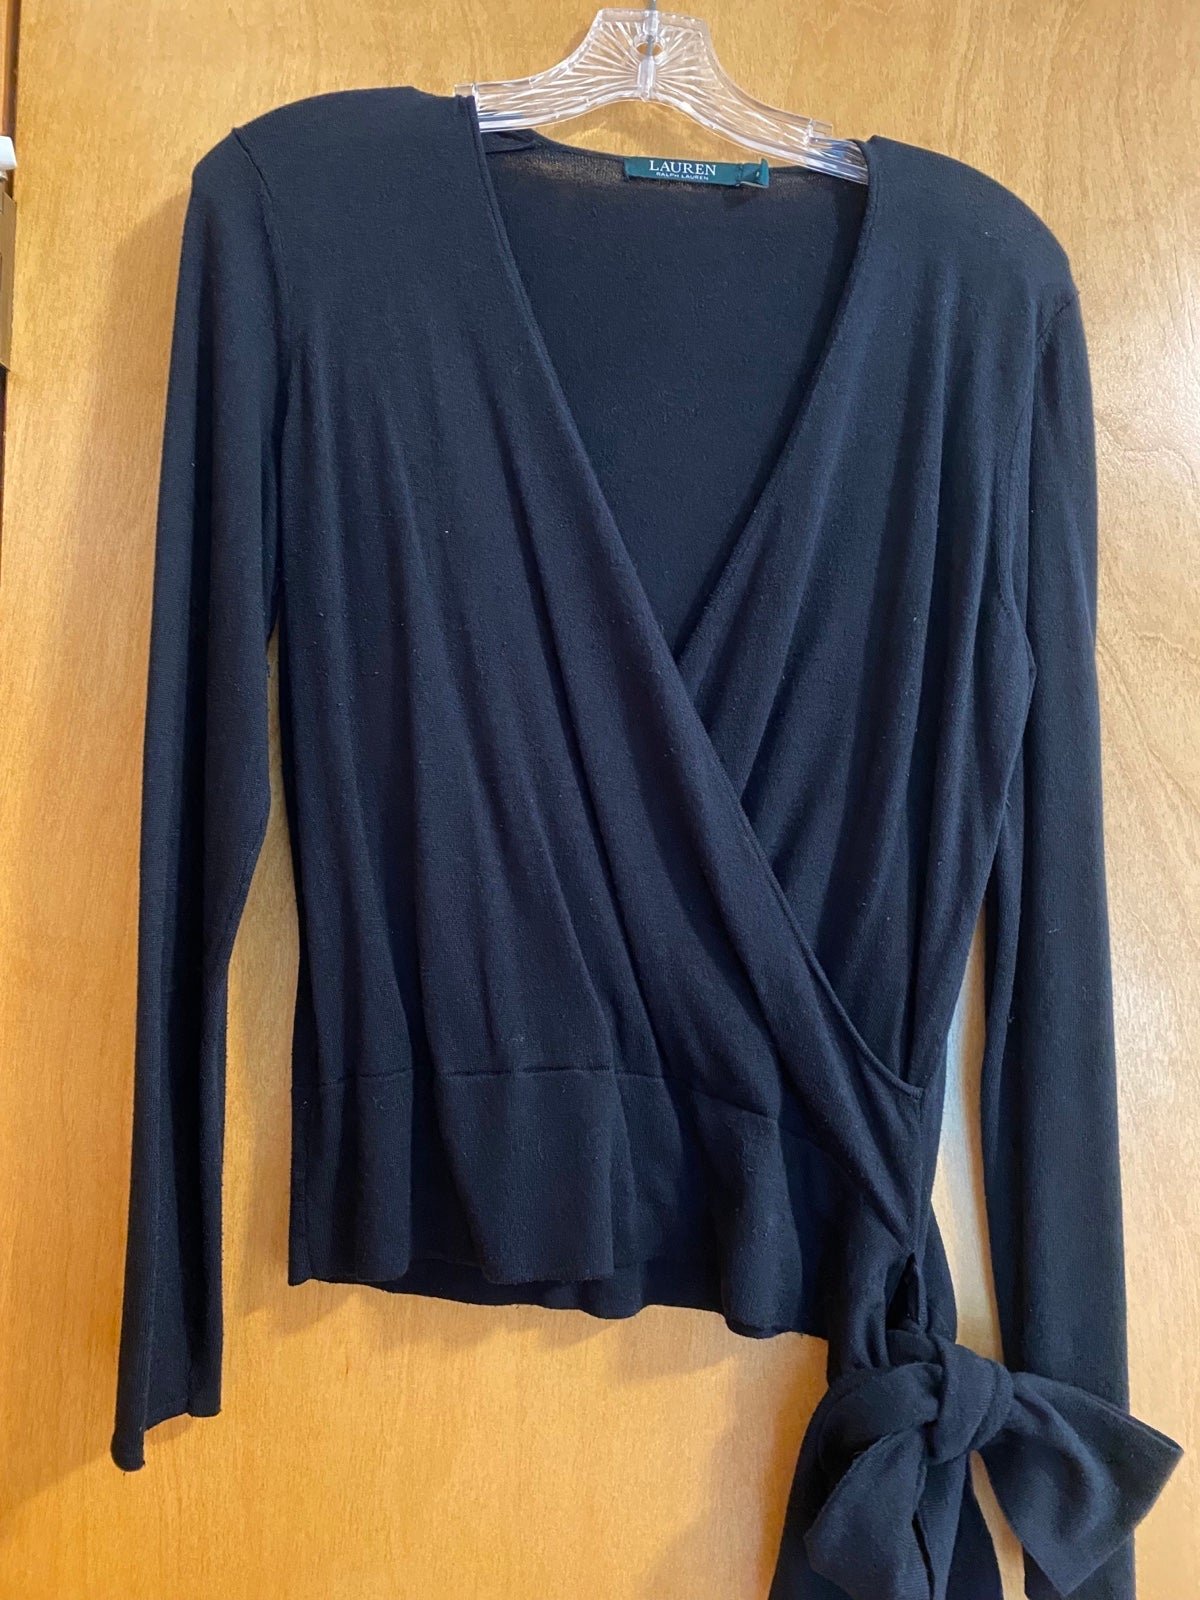 Affordable Ralph Lauren Black Sweater with Side Tie in Size M oK6ALmMEK High Quaity